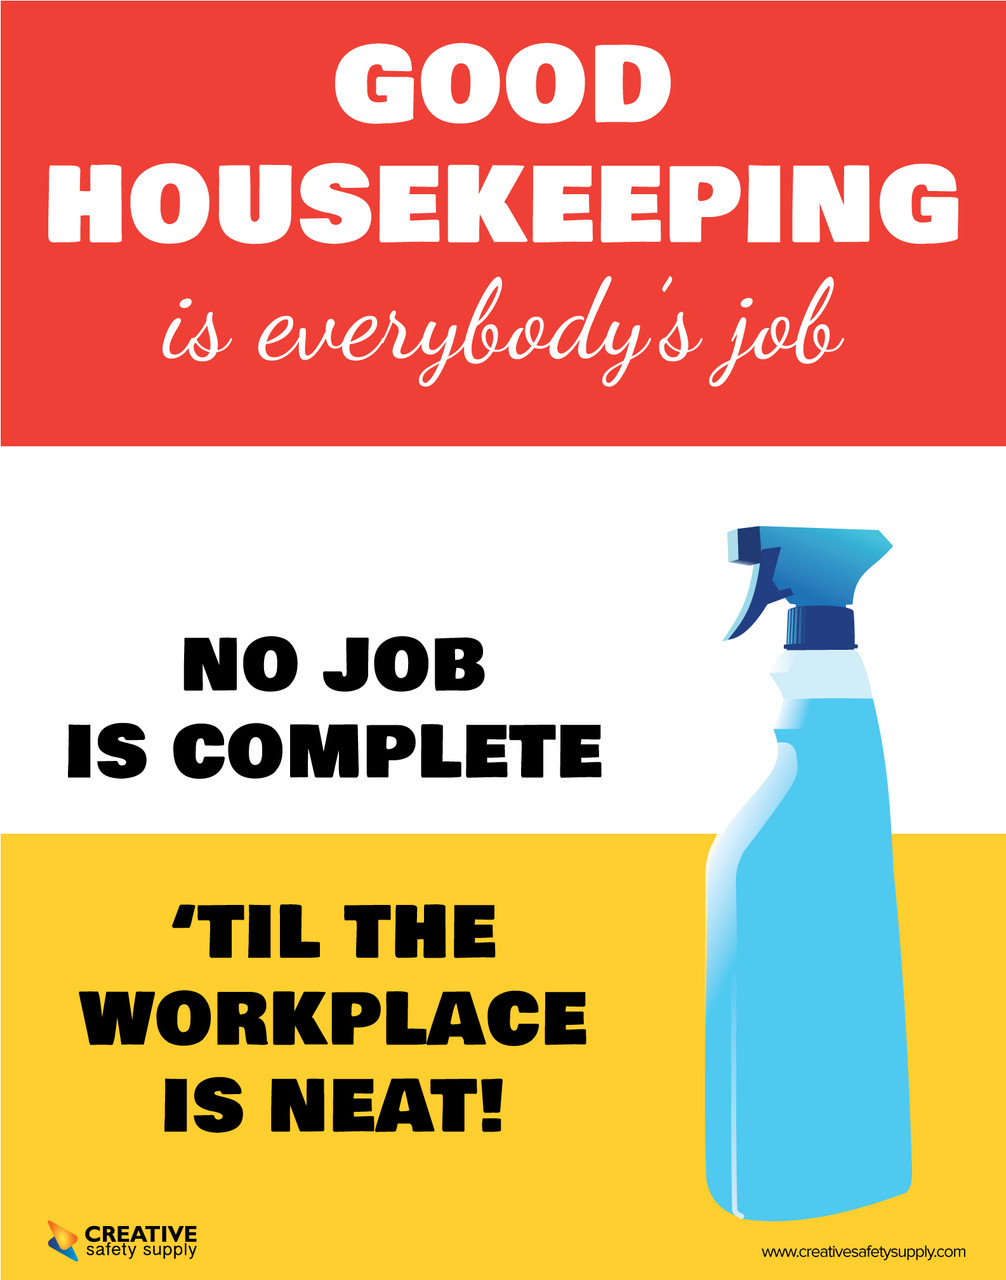 Good Housekeeping - No Job is Complete 'Til the Workplace is Neat